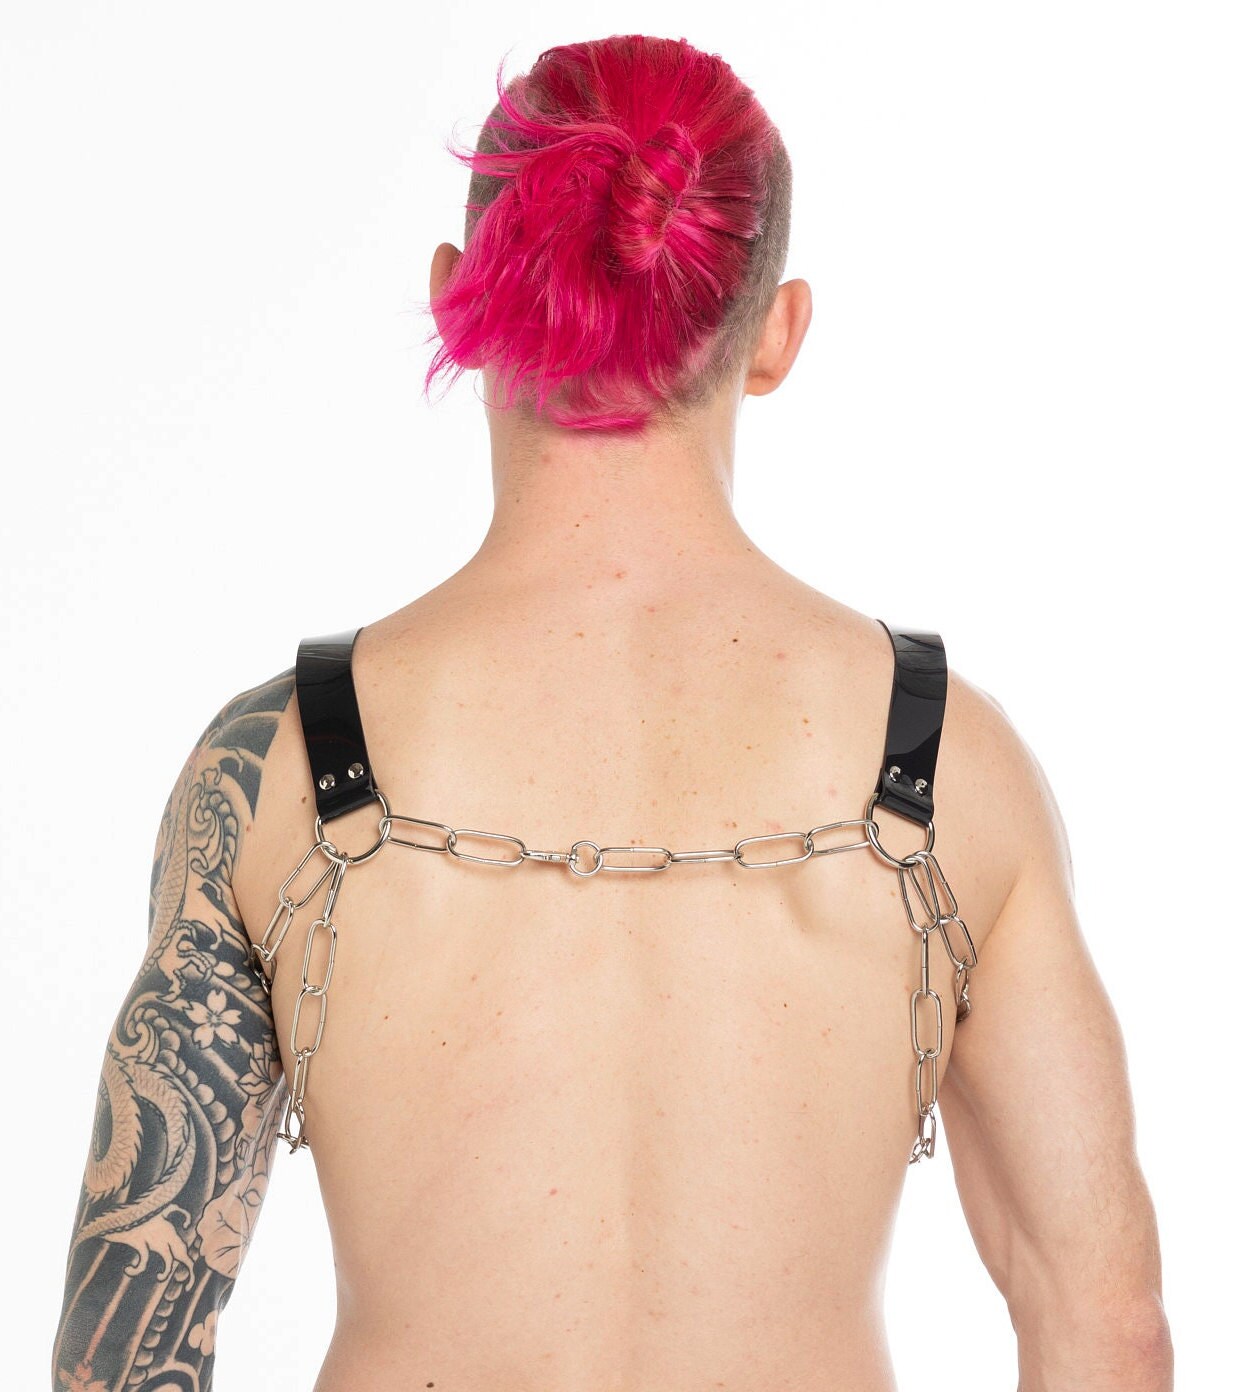 Tattooed man with a PVC chest harness back view